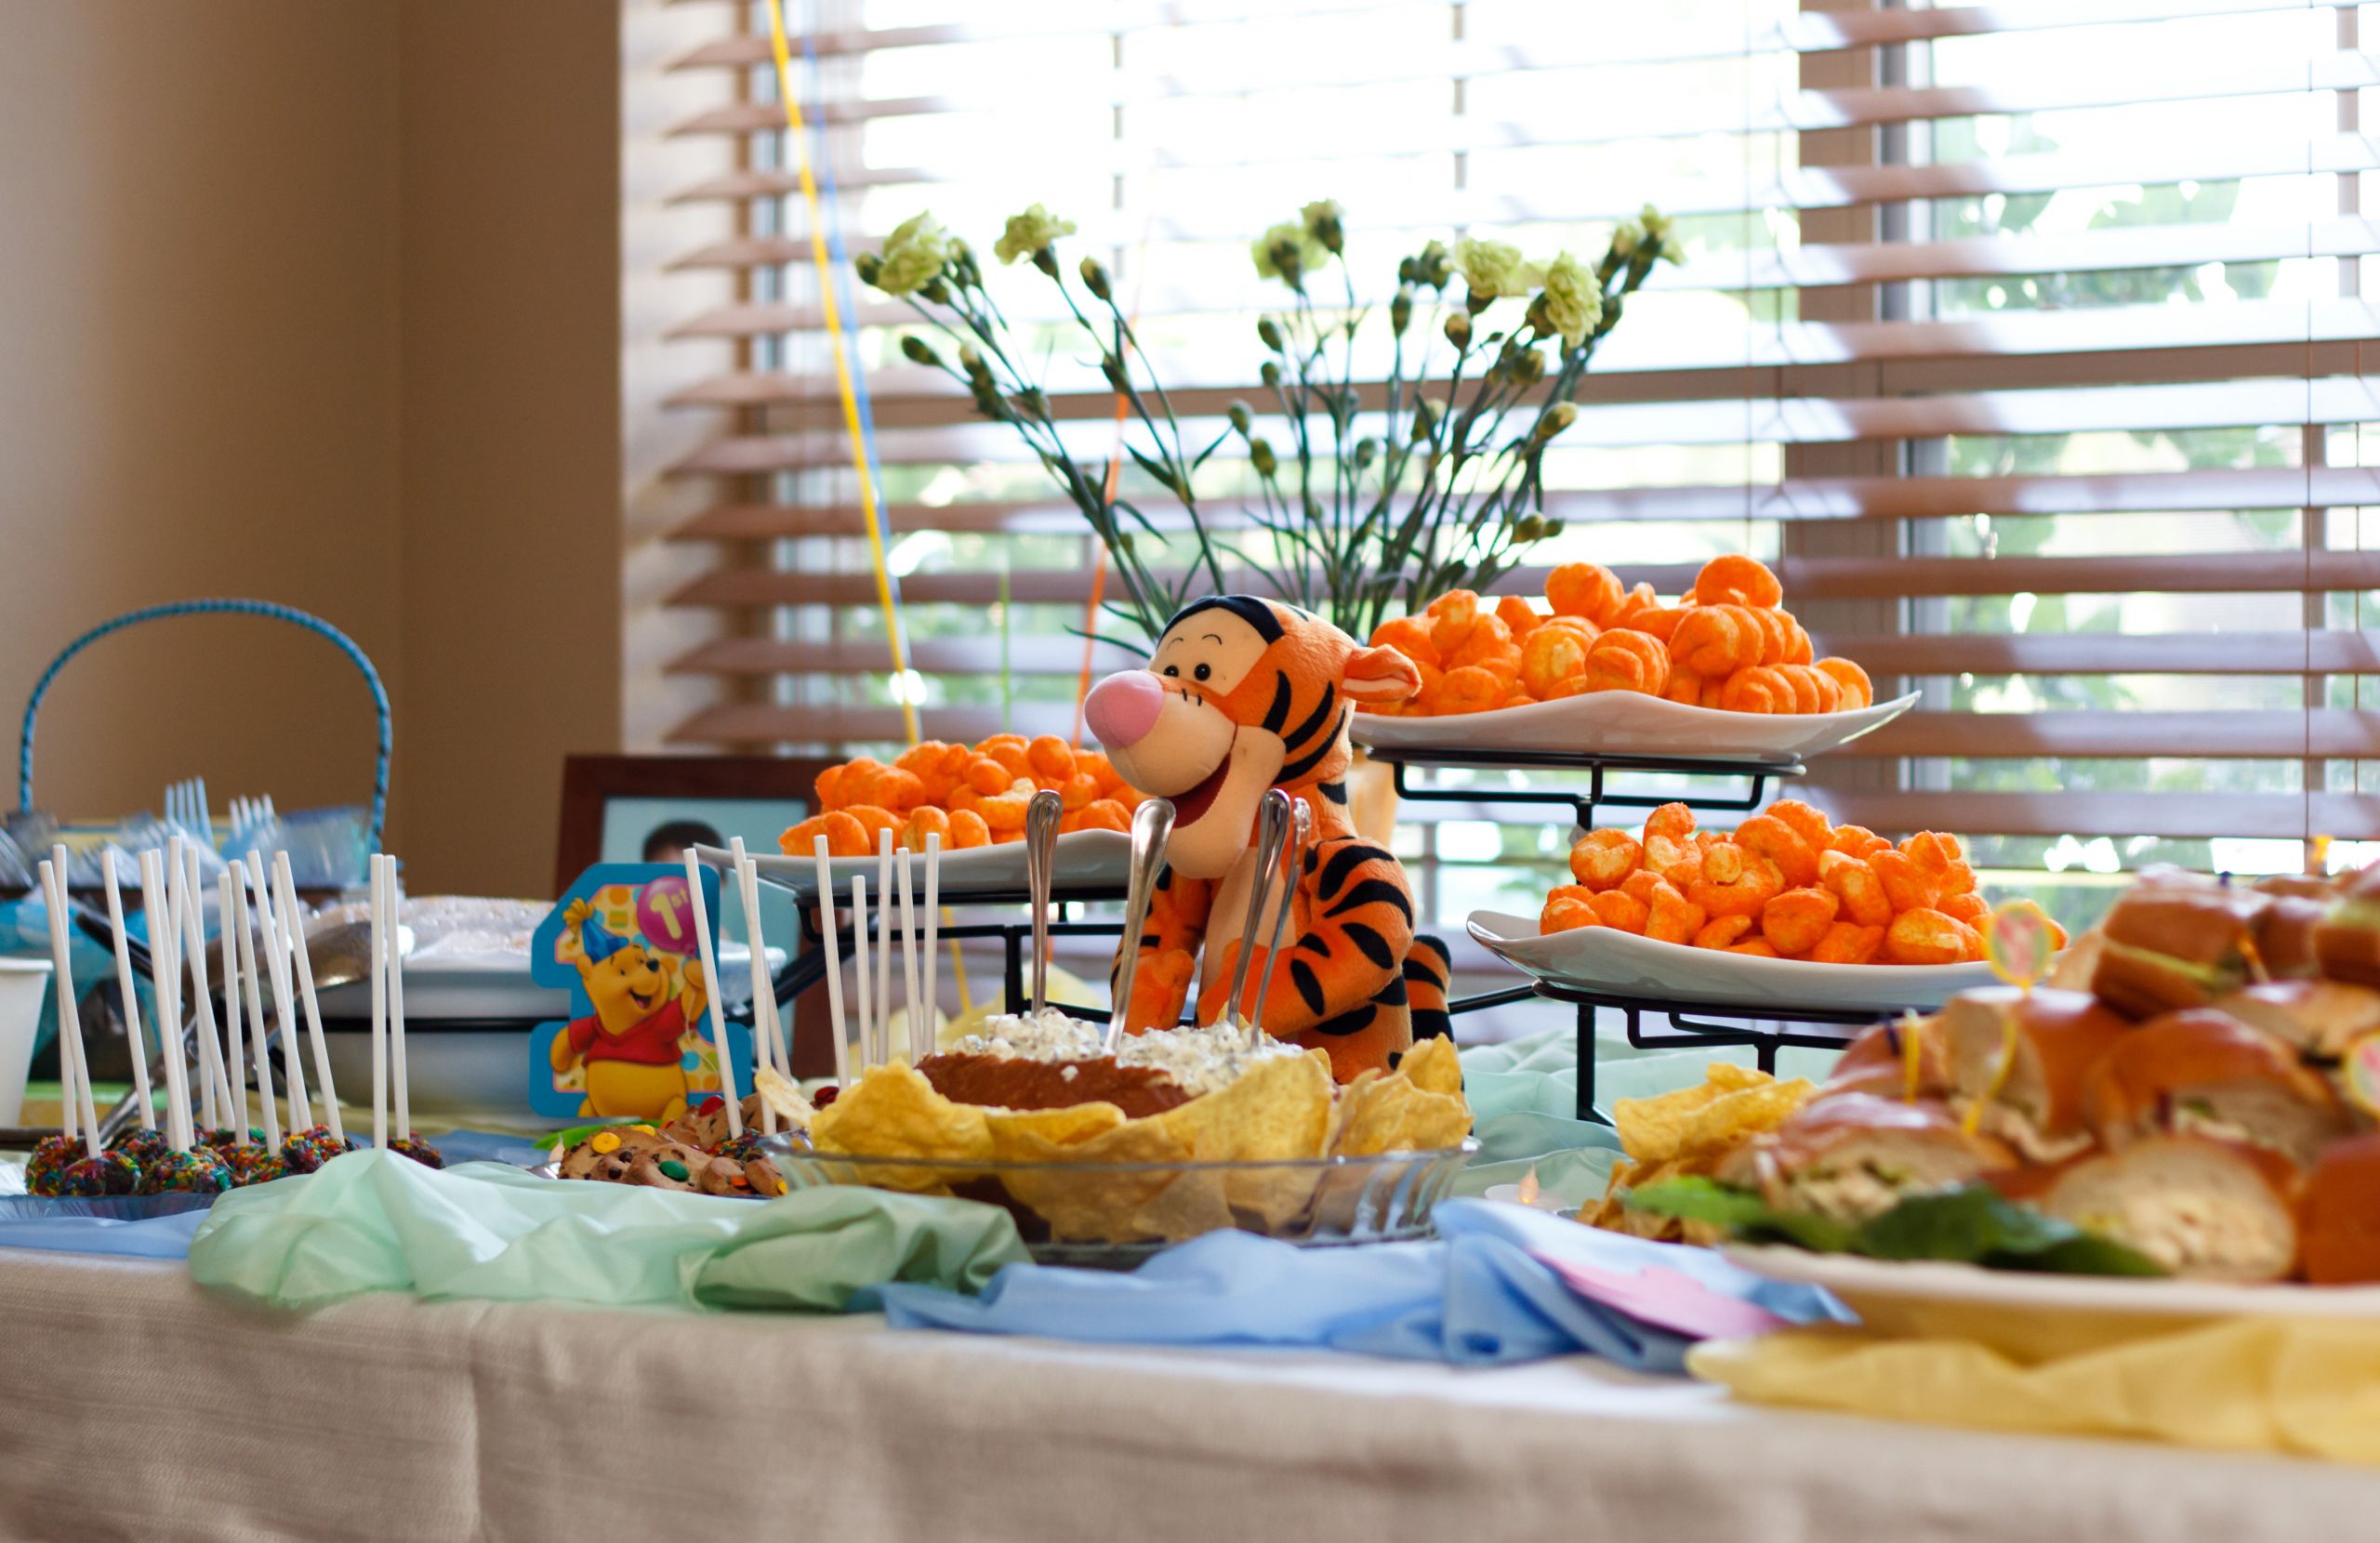 Winnie The Pooh Birthday Party Decorations
 Winnie the Pooh My son’s first birthday party